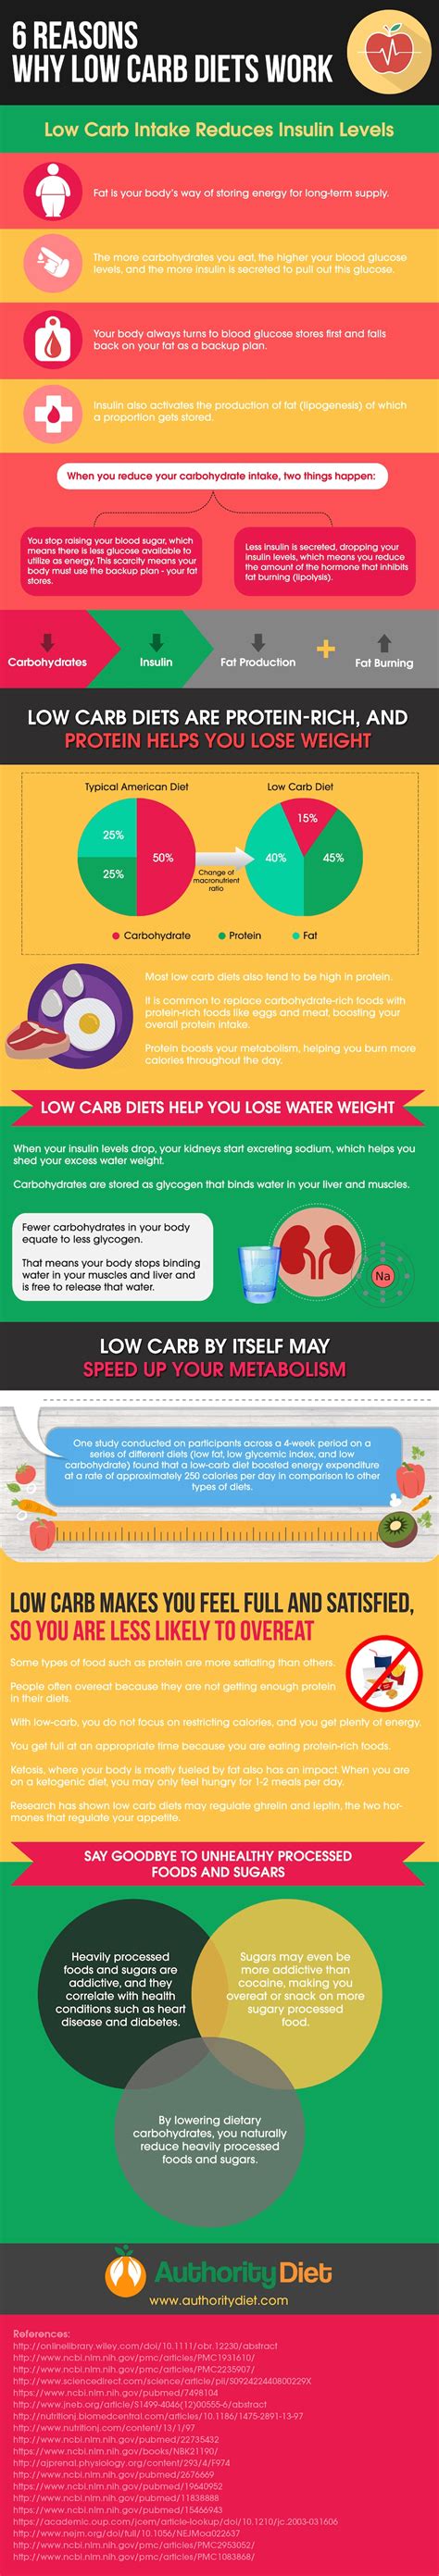 The Weight Loss And Diet Portal Why Do Low Carb Diets Work Heres 6